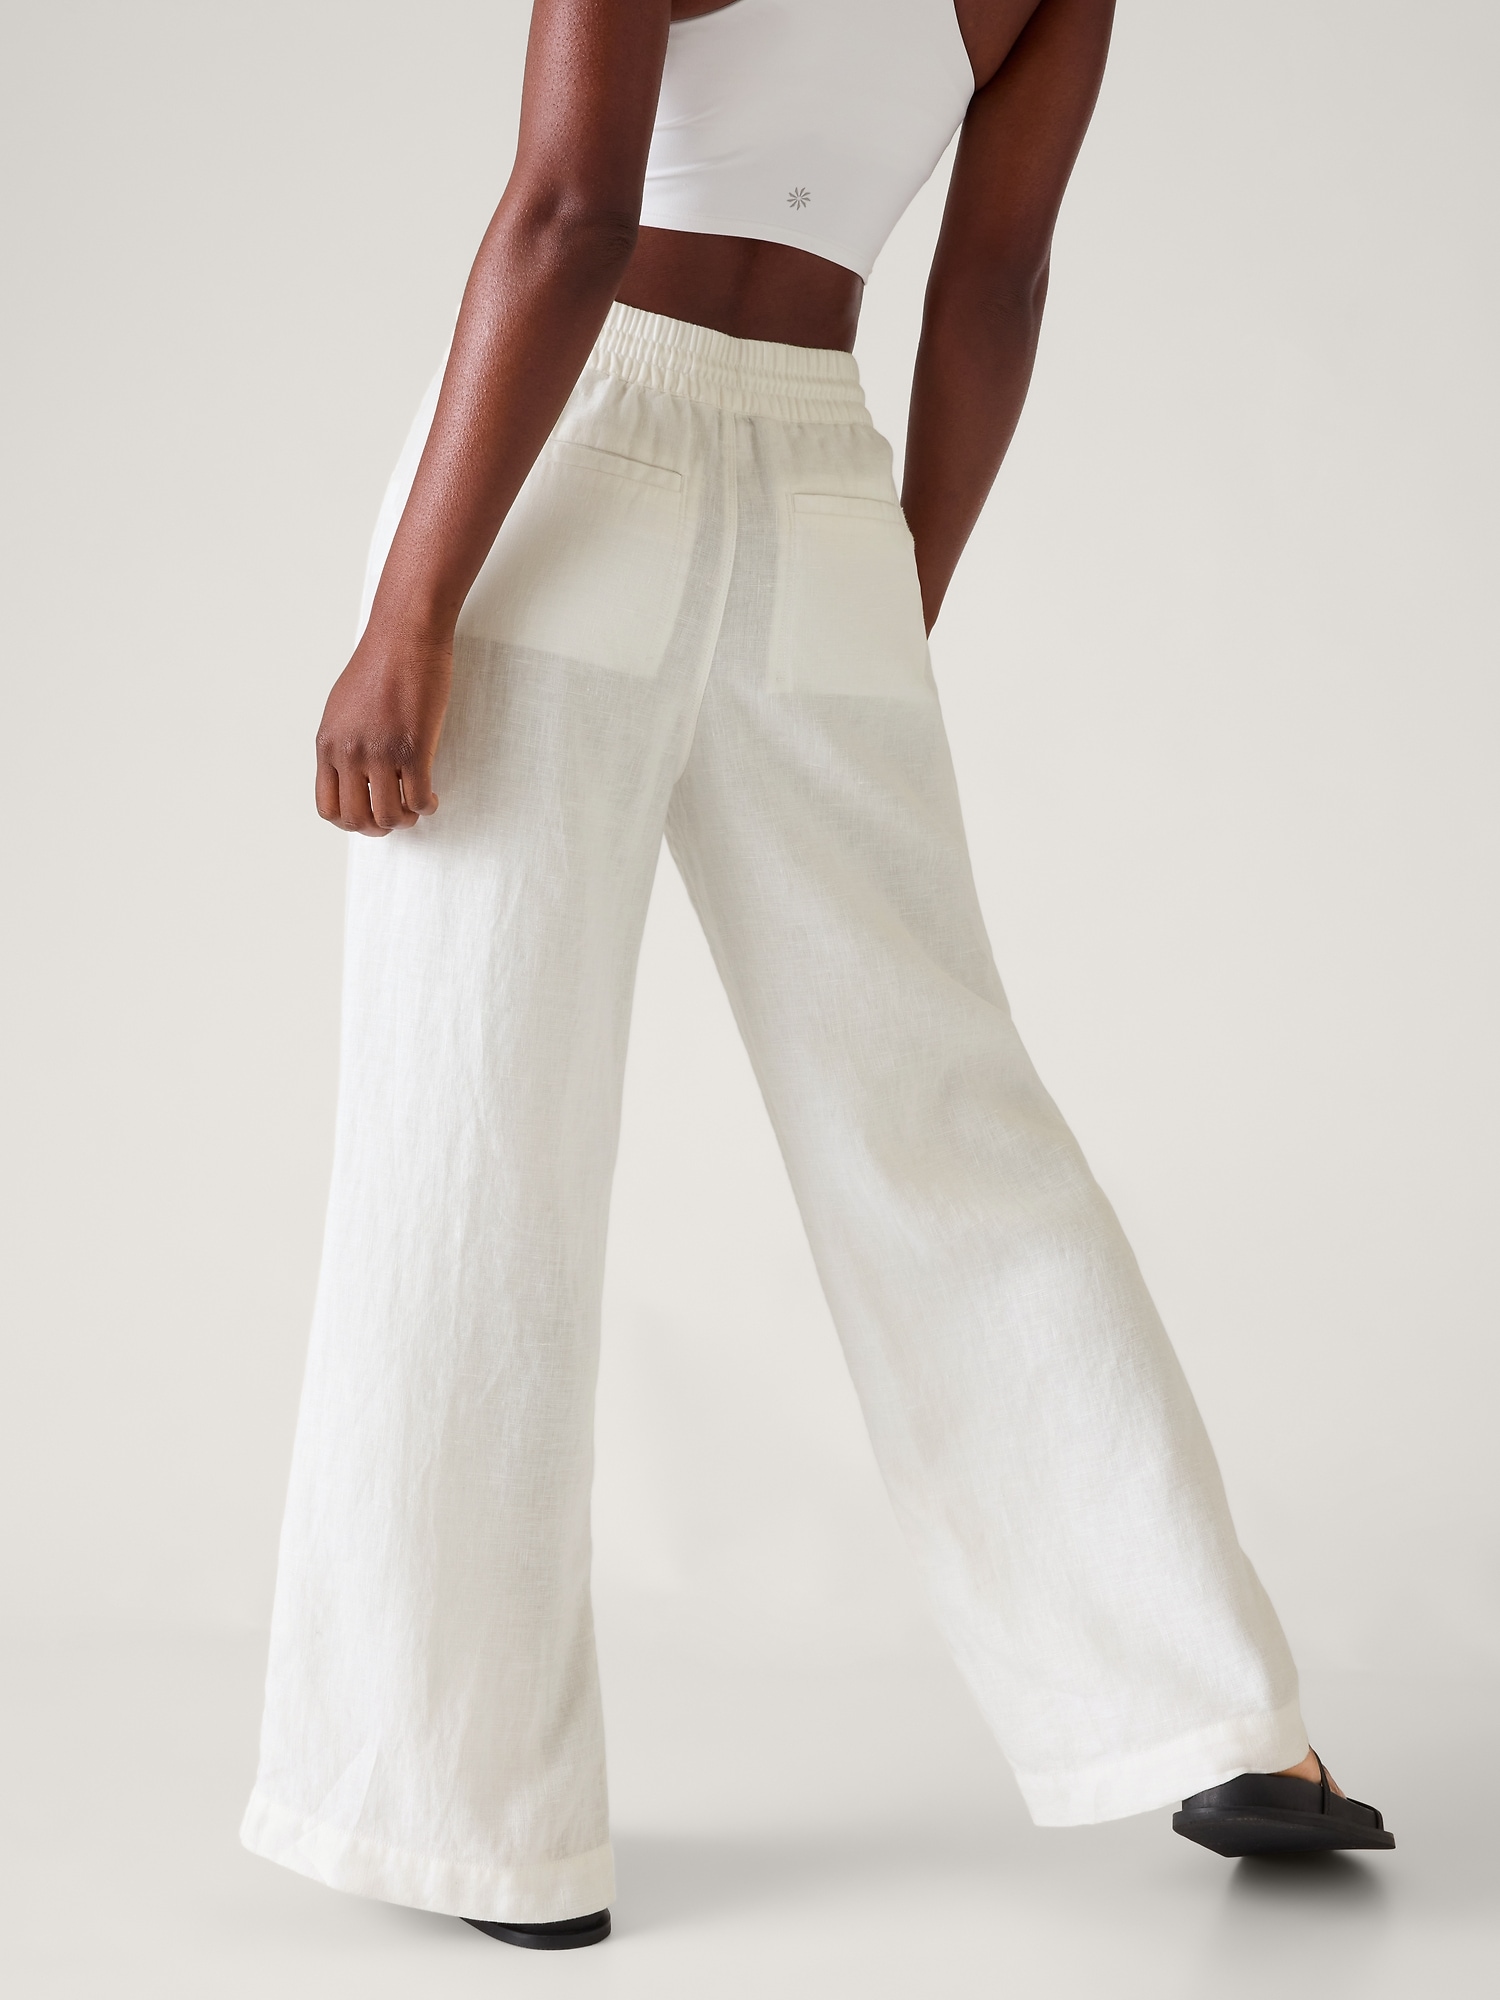 Buy Flared Boho Pants, Wide-leg Linen Trousers, High Waisted Pants, Maxi Linen  Trousers for Women, Heavy Linen Pants WANTED Online in India - Etsy